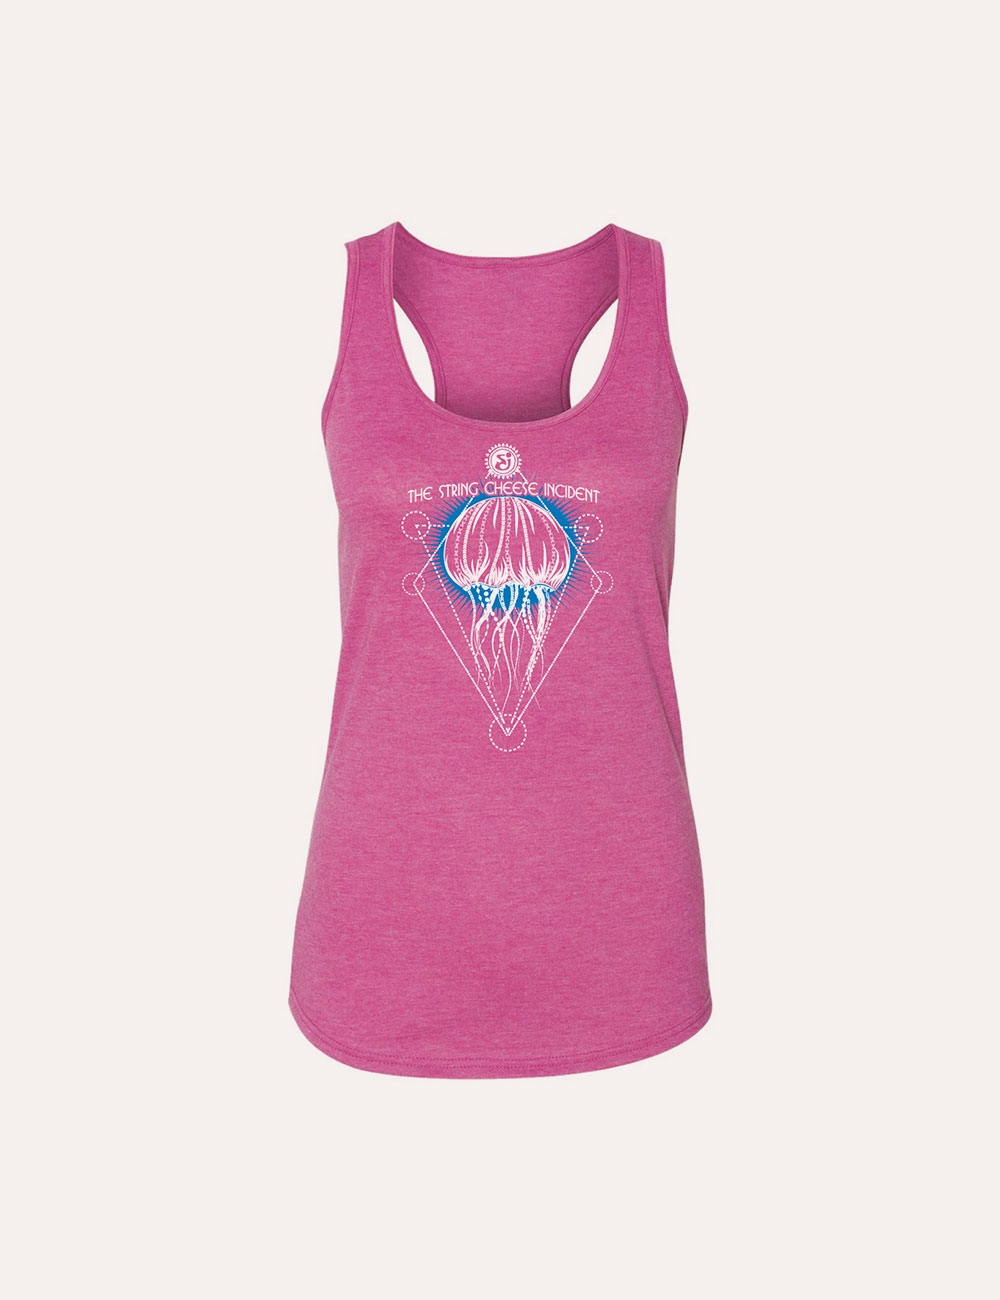 The String Cheese Incident - tanktop - Women - Geo Jelly Raspberry